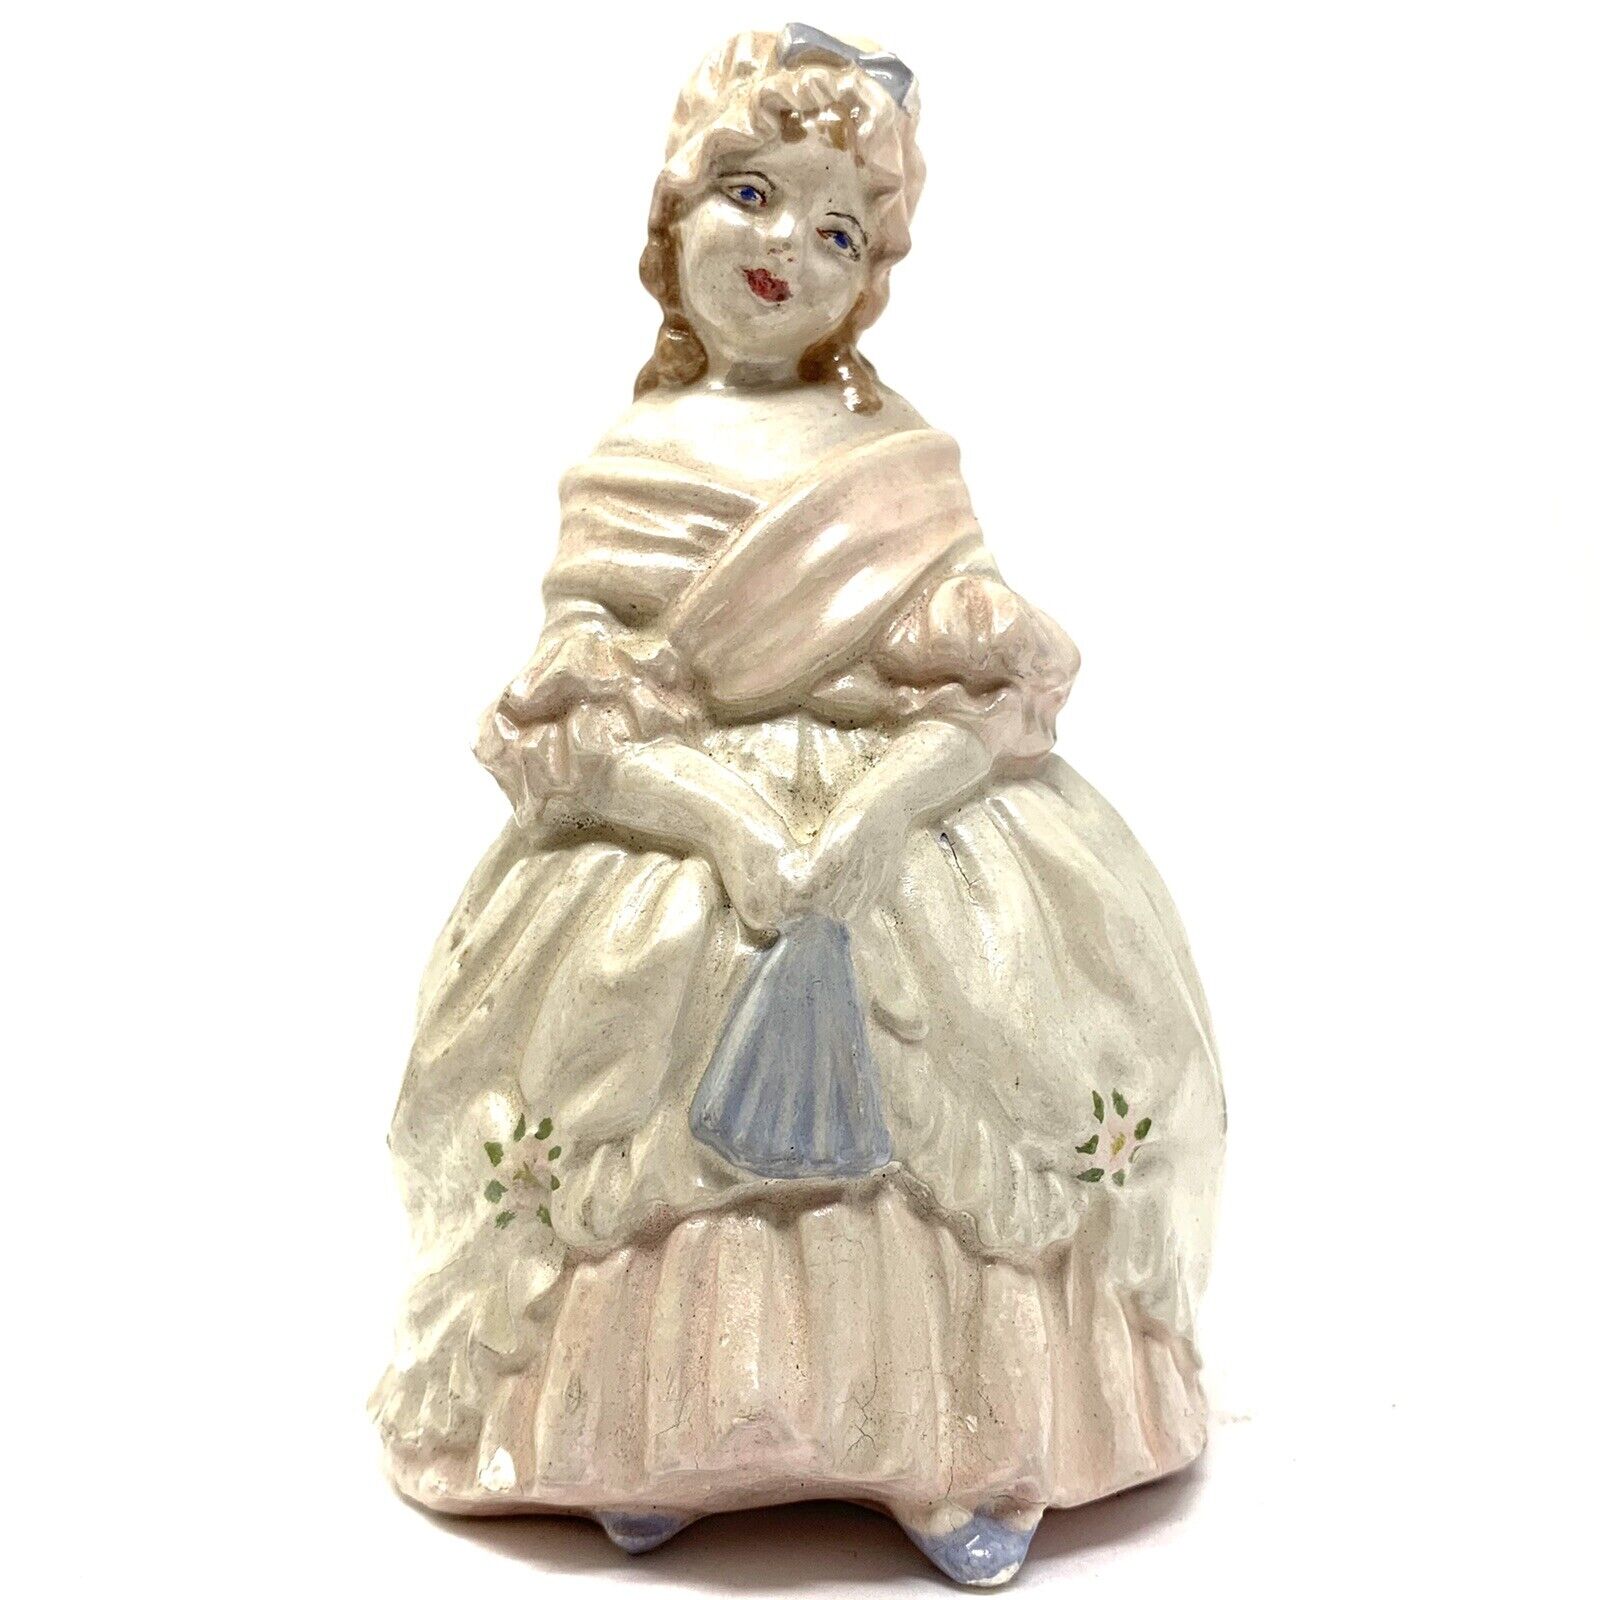 Vtg 1940s COLONIAL VICTORIAN GIRL Ceramic Hand Painted Mold Figurine